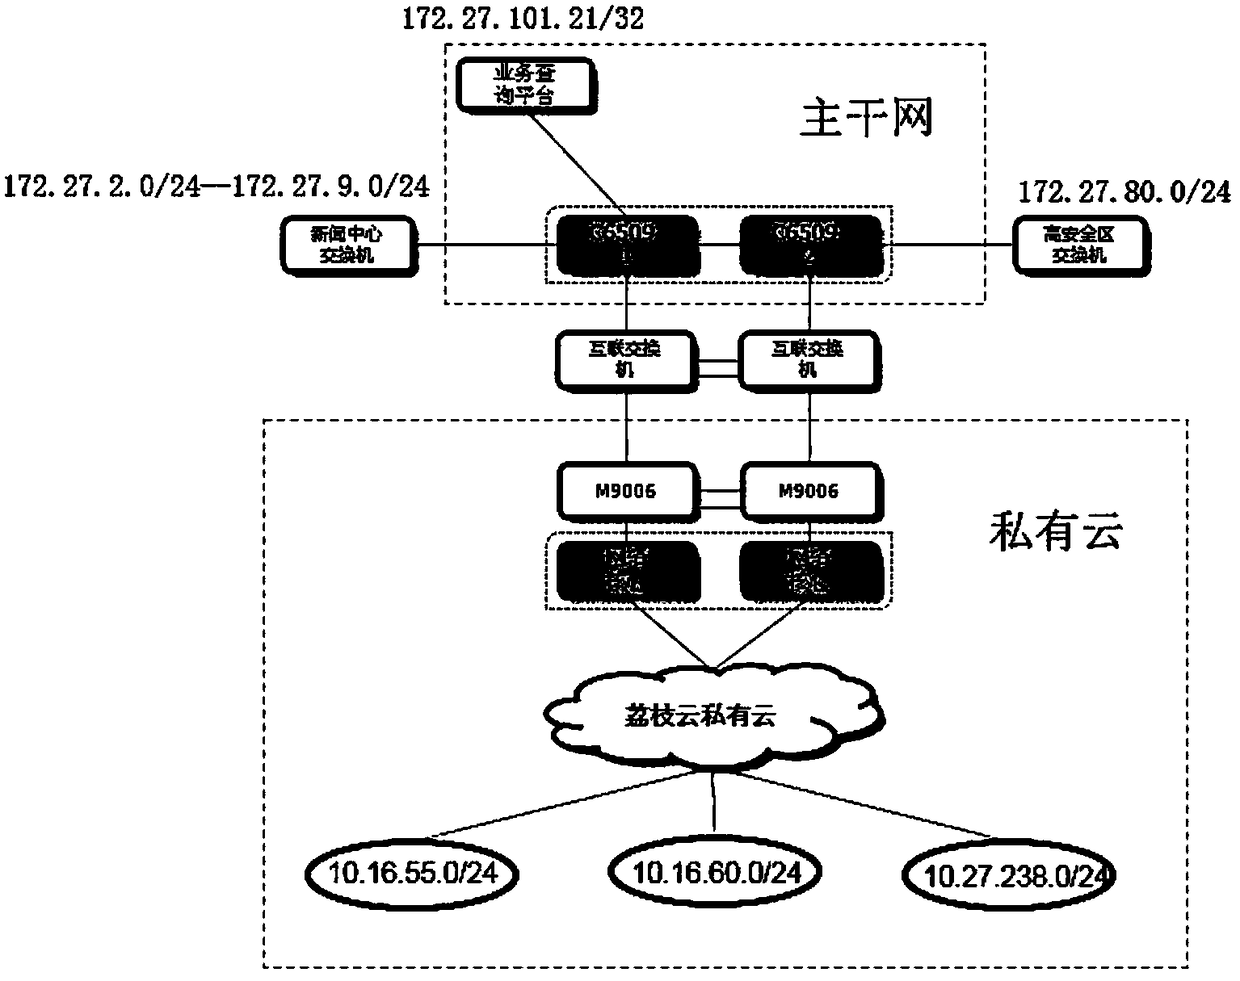 Method for realizing interaction with all-station network of television station based on interface service of media cloud Platform-as-a-Service layer